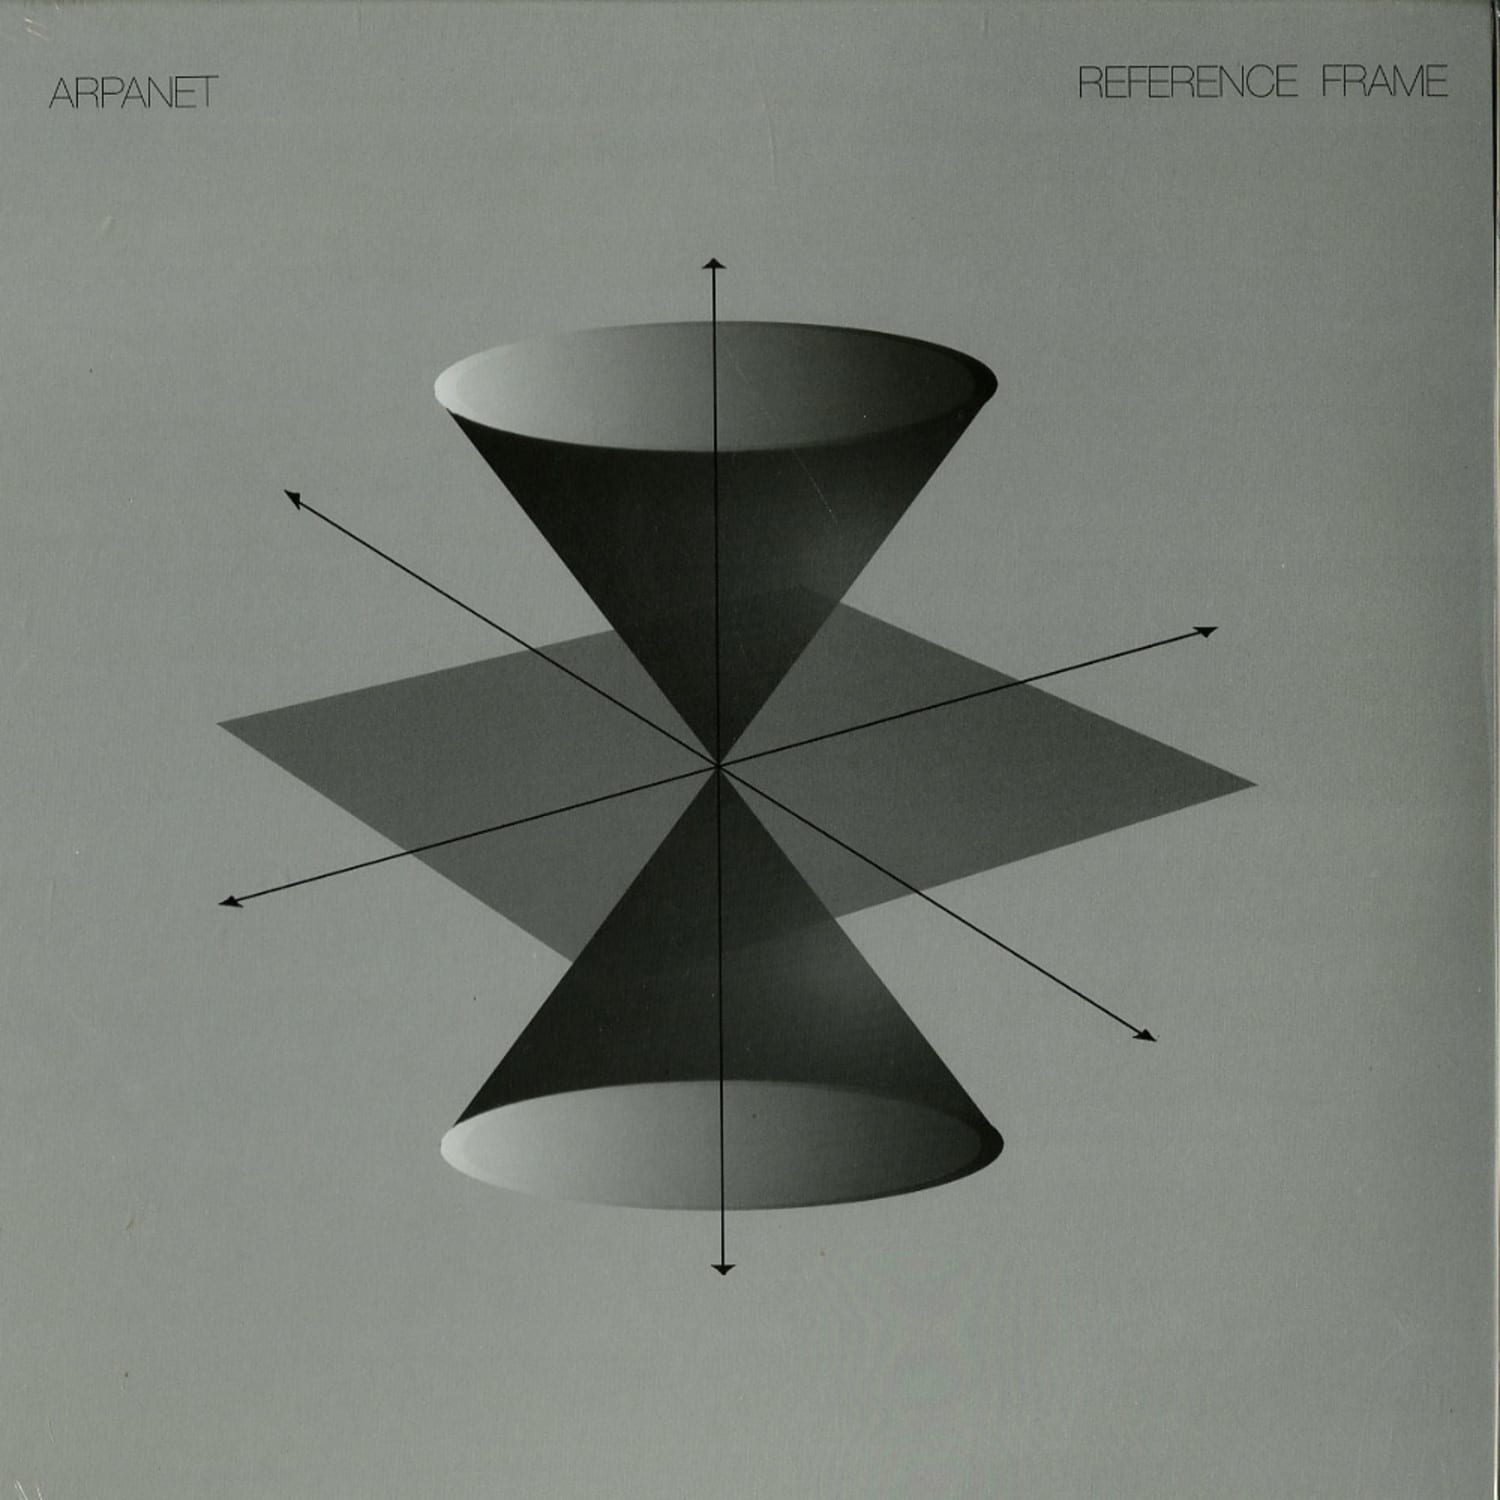 Arpanet - REFERENCE FRAME